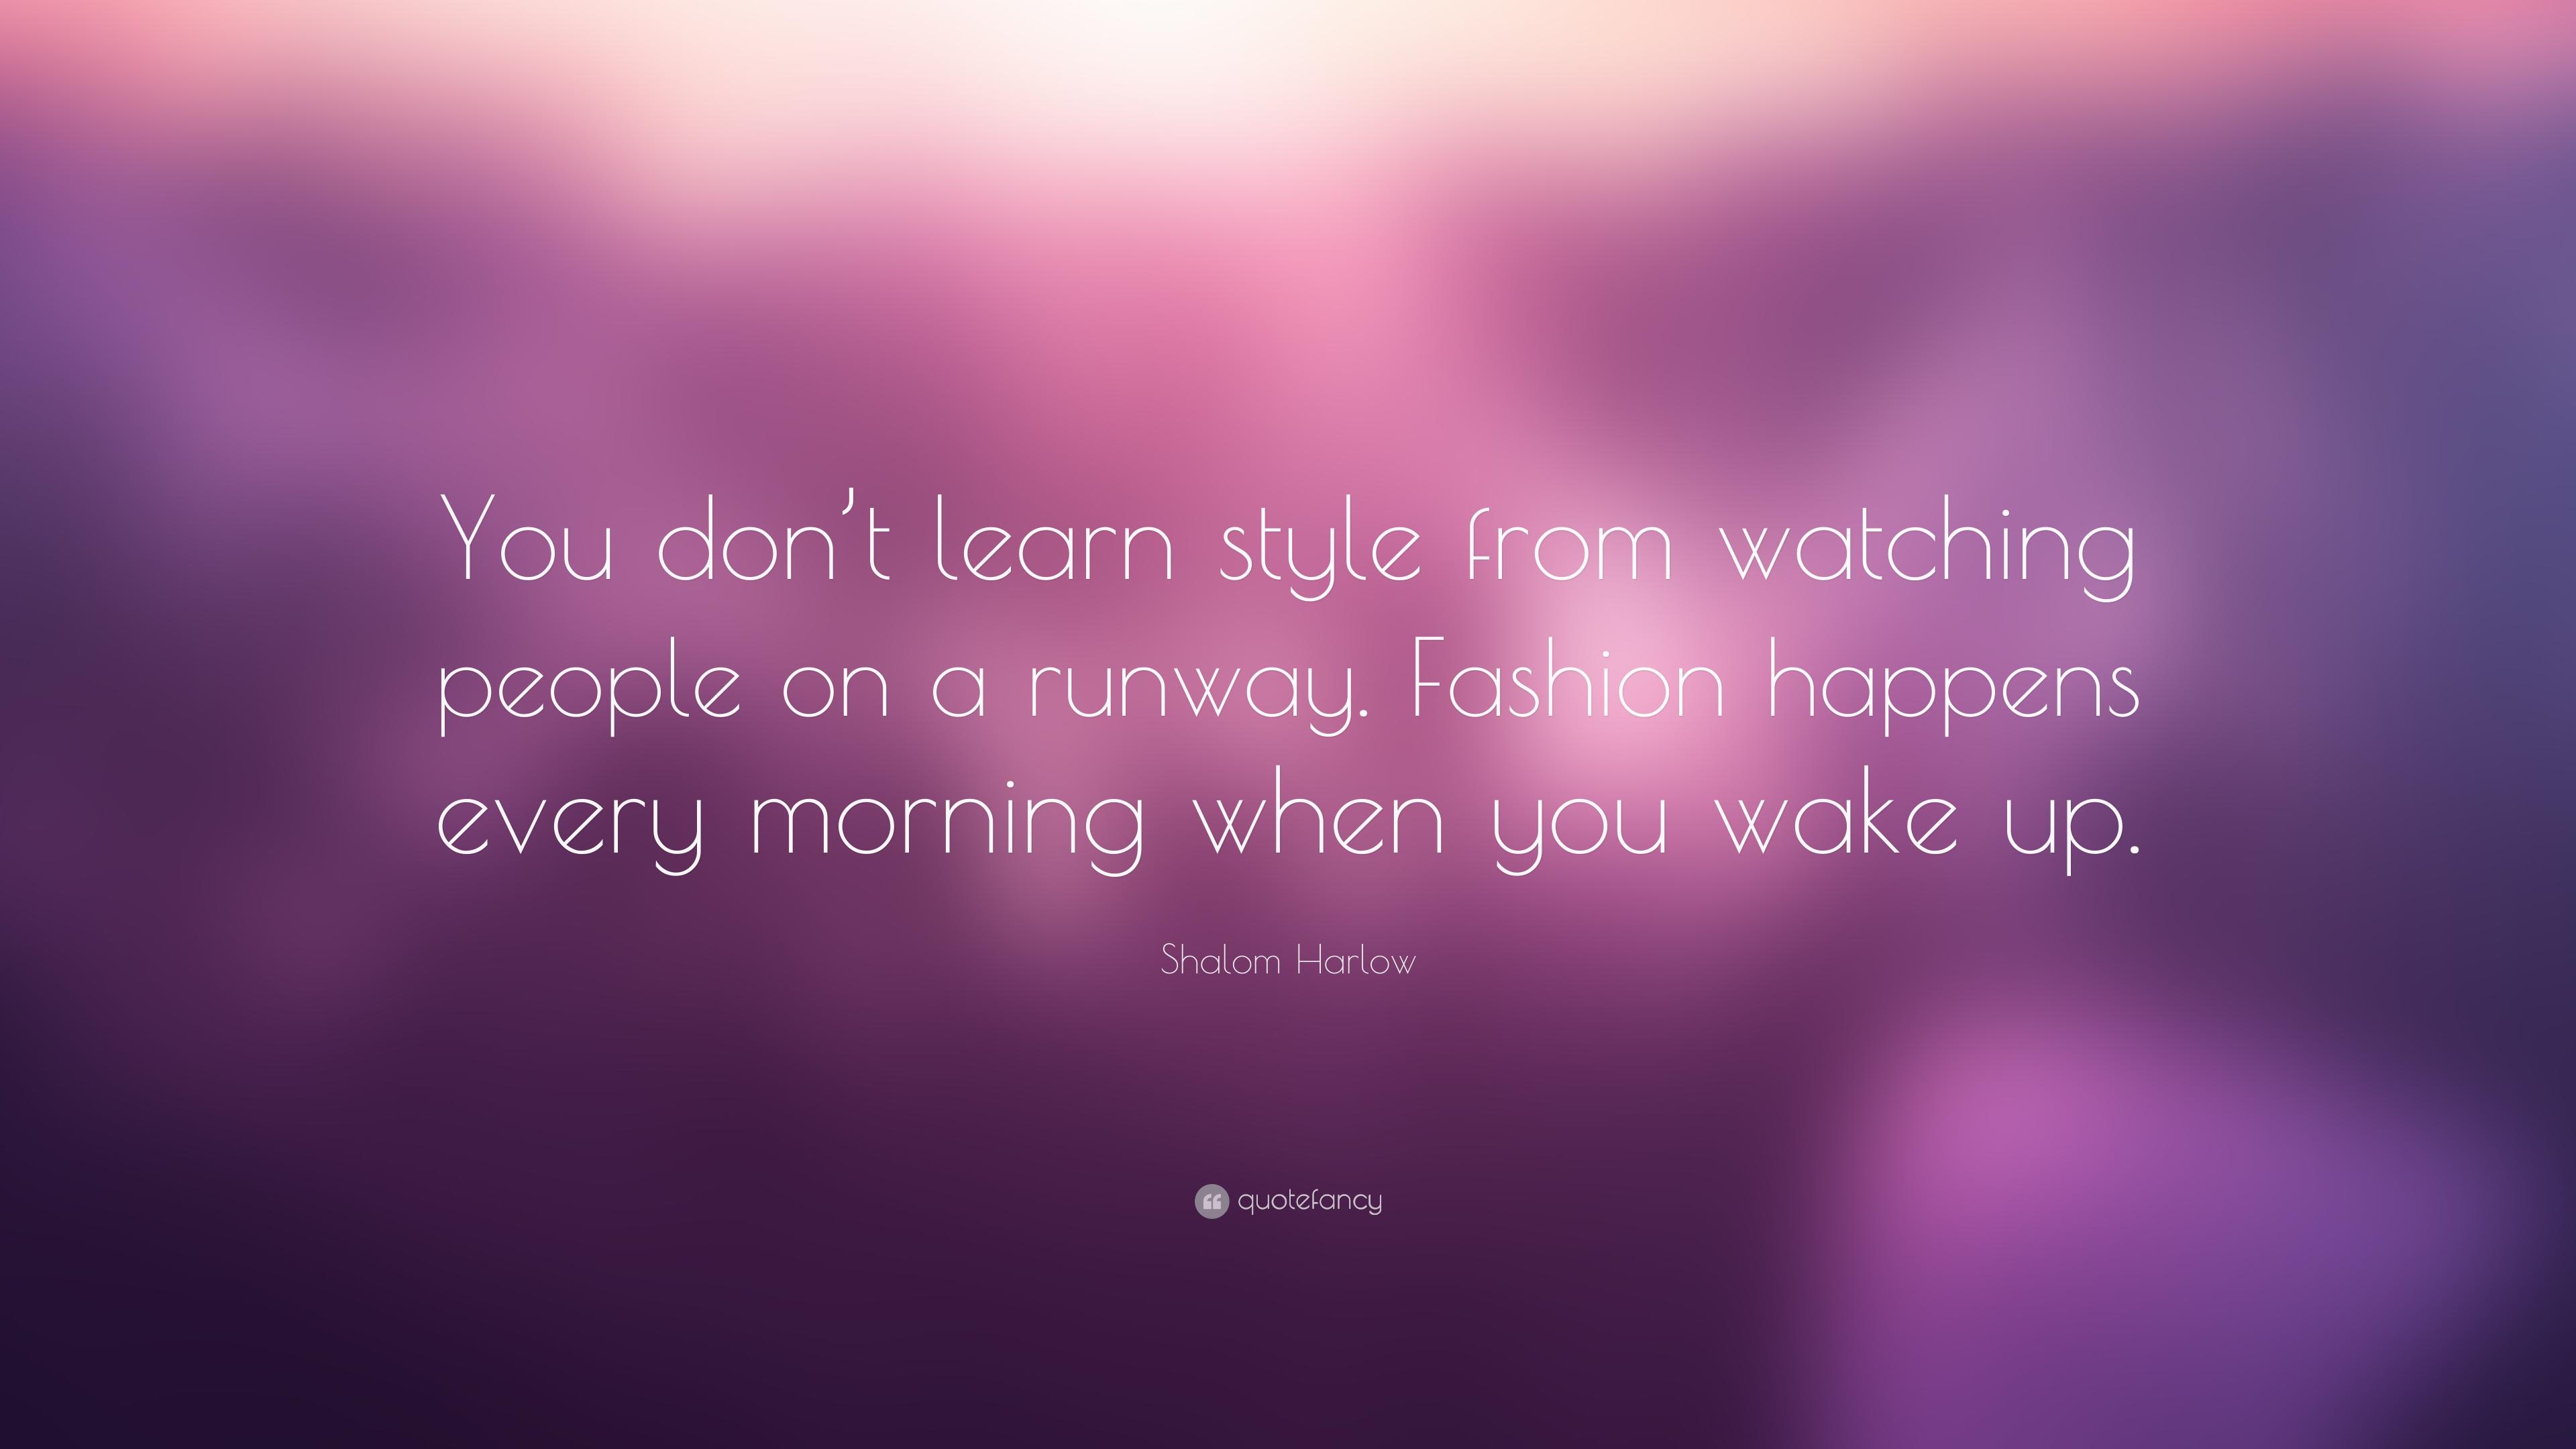 Shalom Harlow Quote: “You don't learn style from watching people